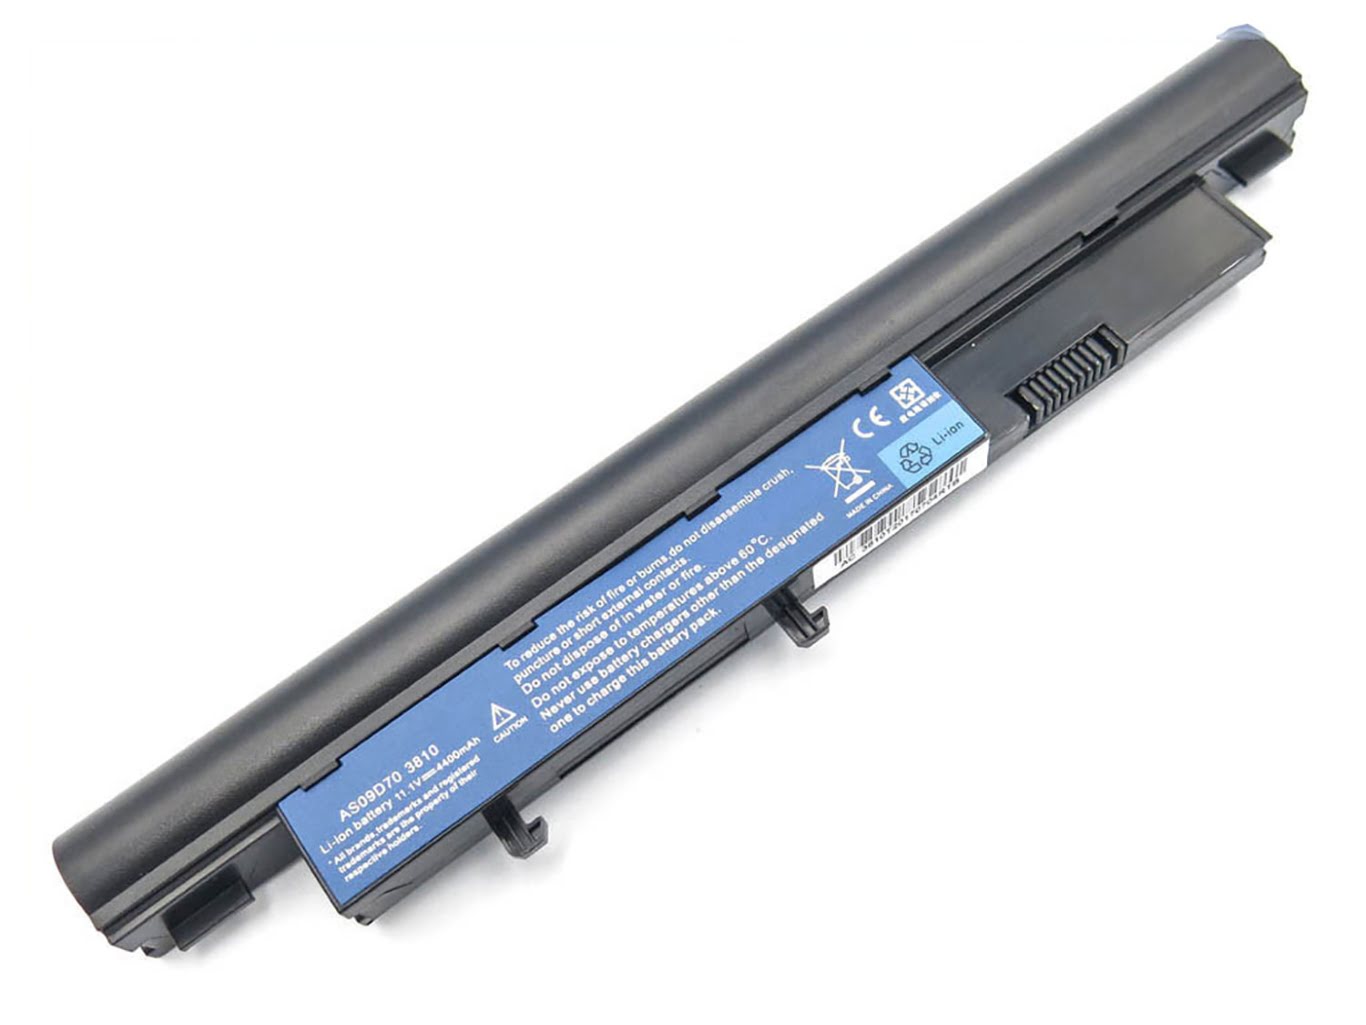 AK.006BT.027, AS09D31 replacement Laptop Battery for Acer Aspire 3410, Aspire 3410G, 11.1V, 6 cells, 4400mAh